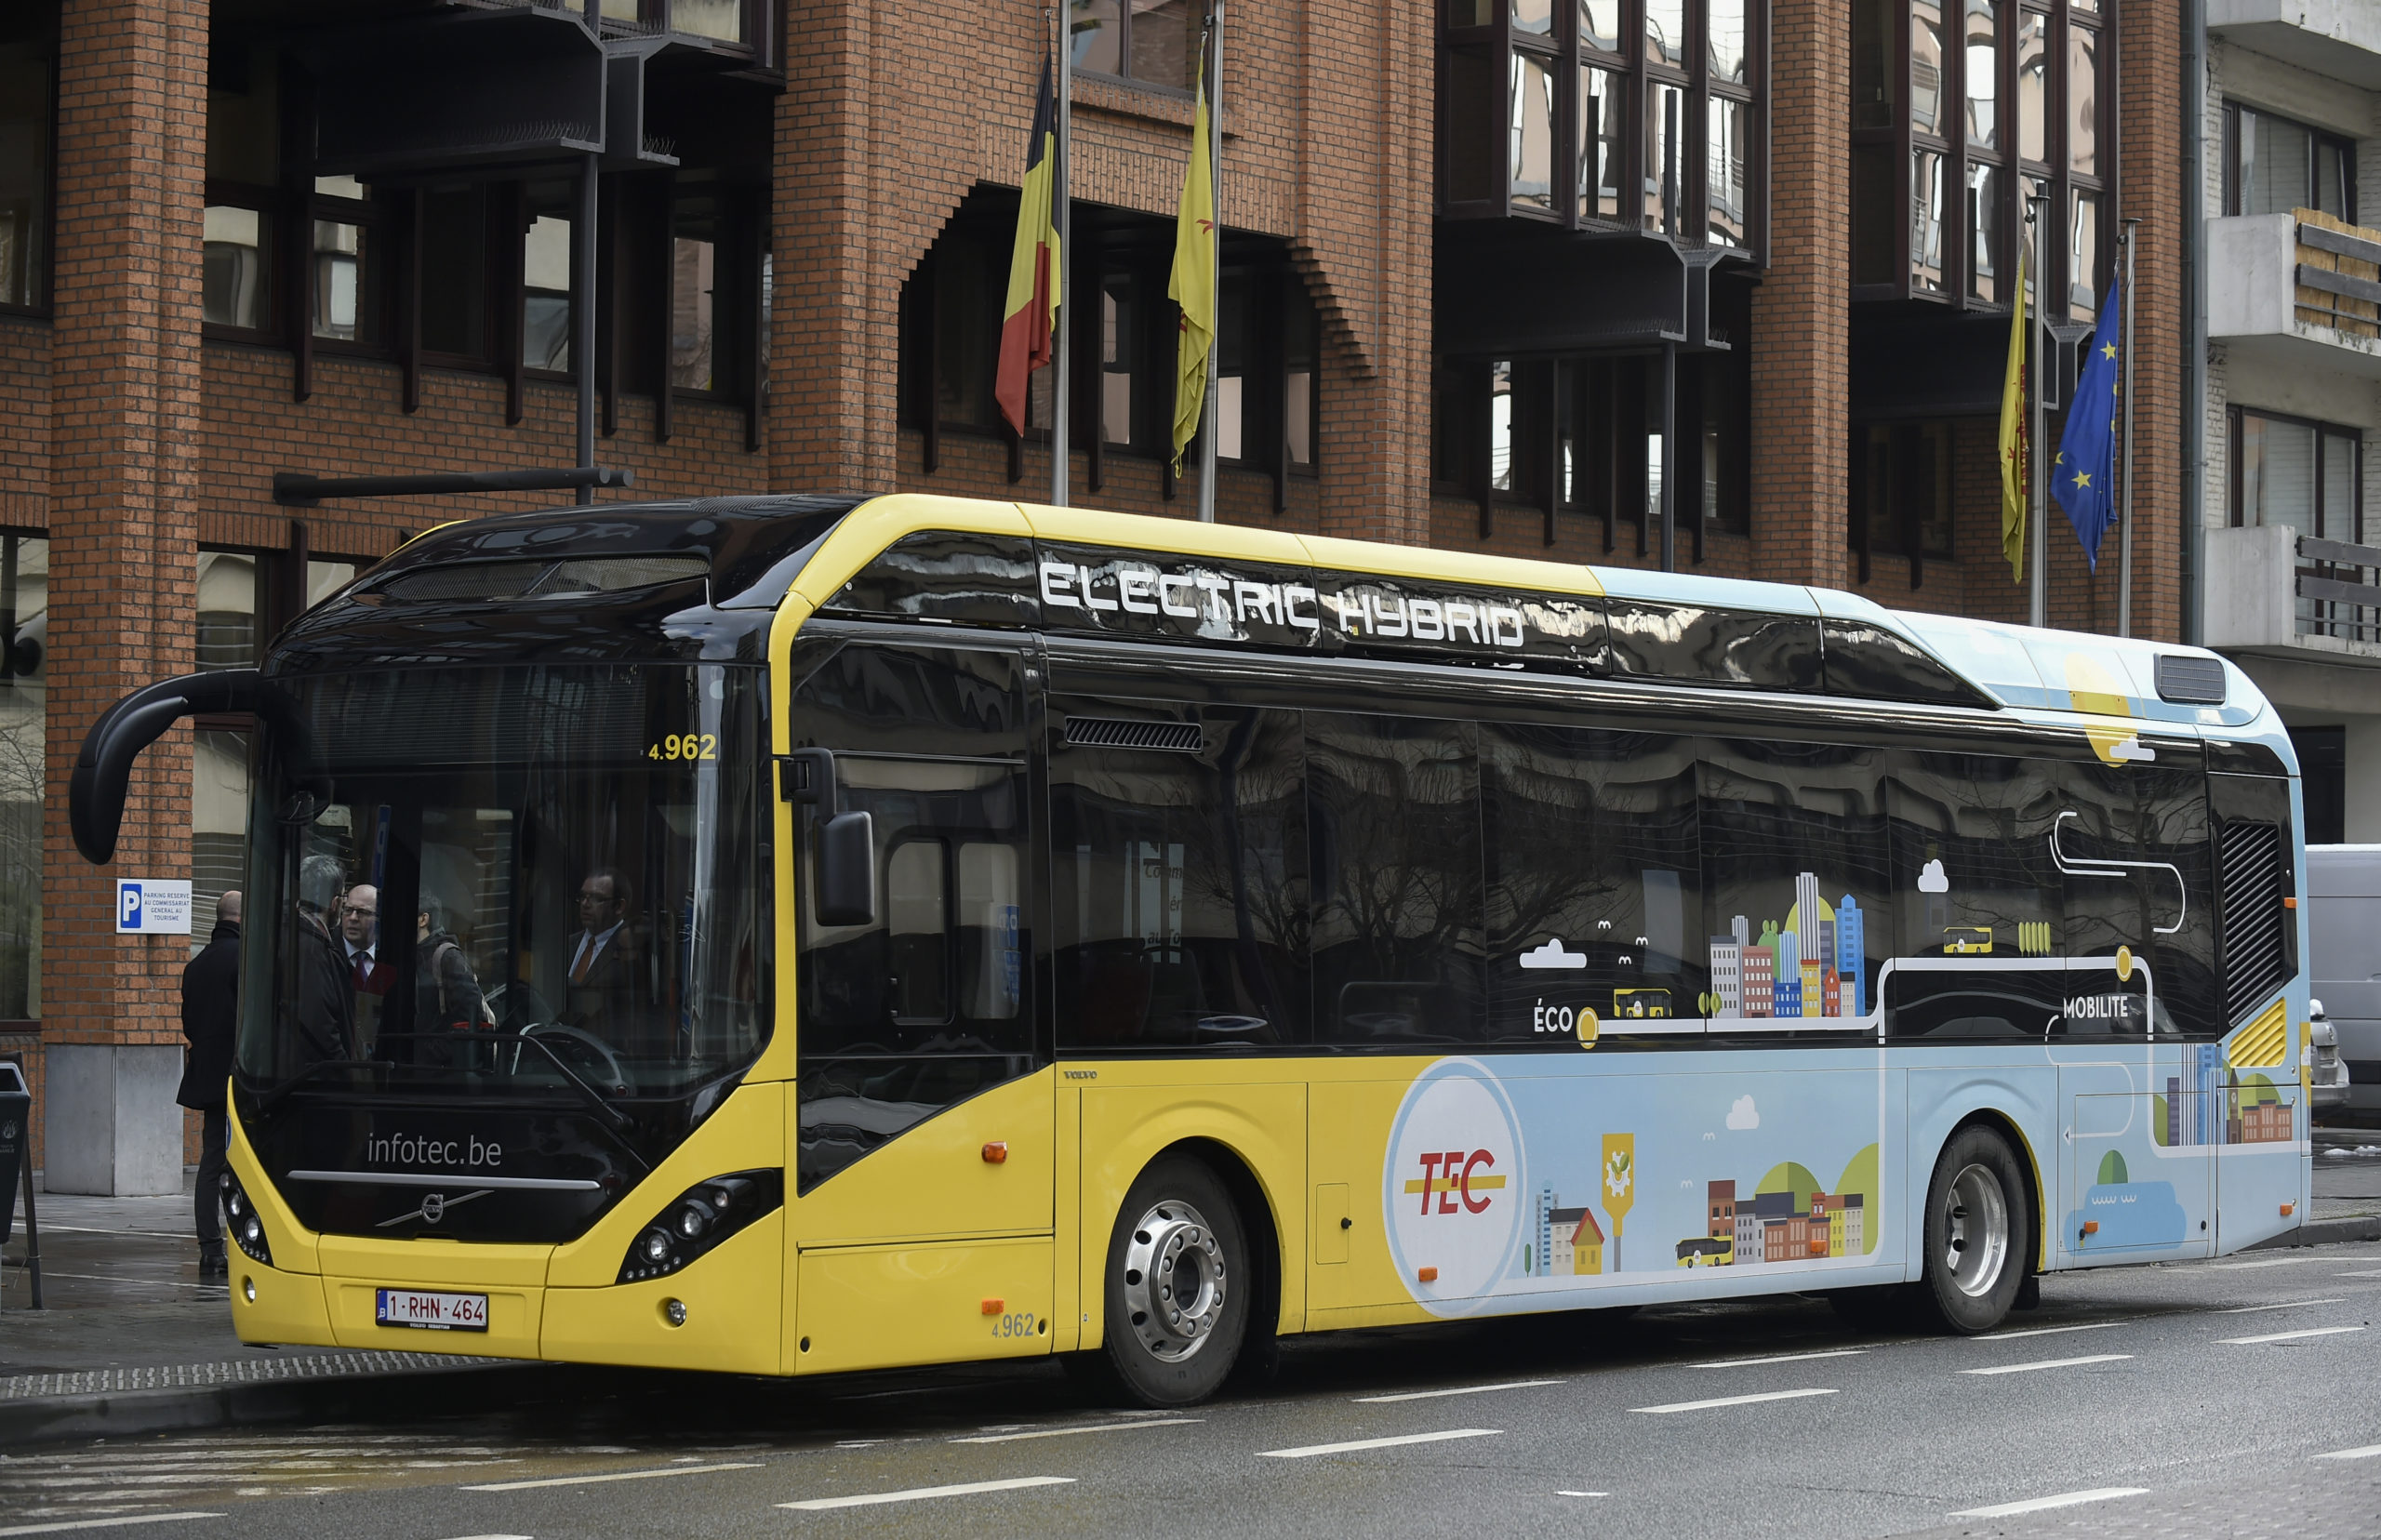 TEC’s hybrid buses show unexpected ‘reliability issues’